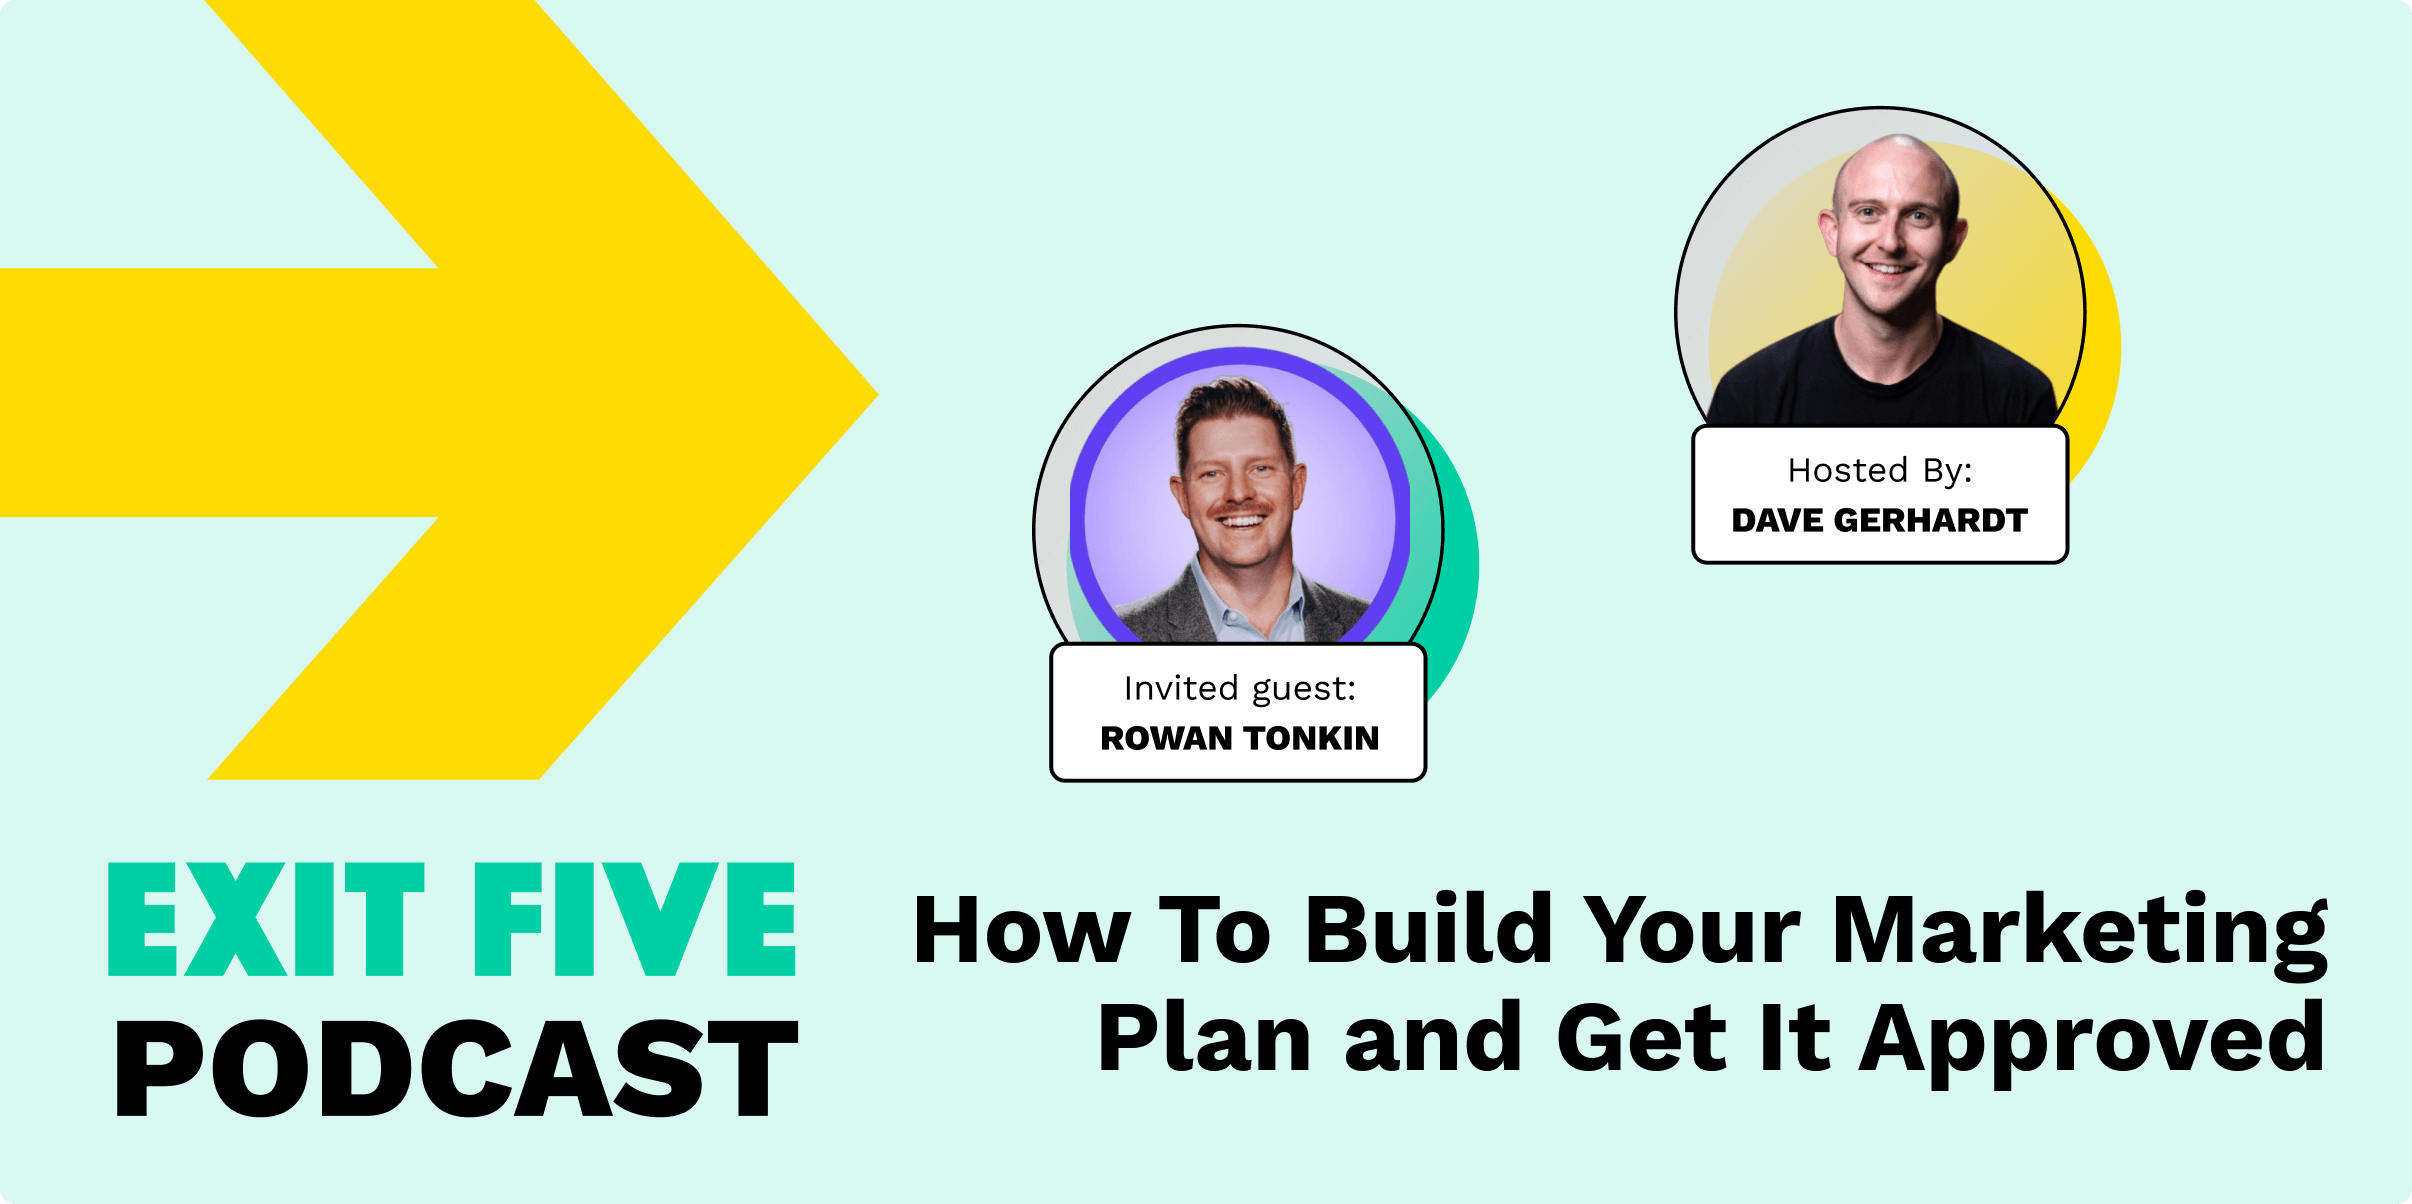 How To Build Your Marketing Plan and Get It Approved (with Rowan Tonkin, CMO, Planful)